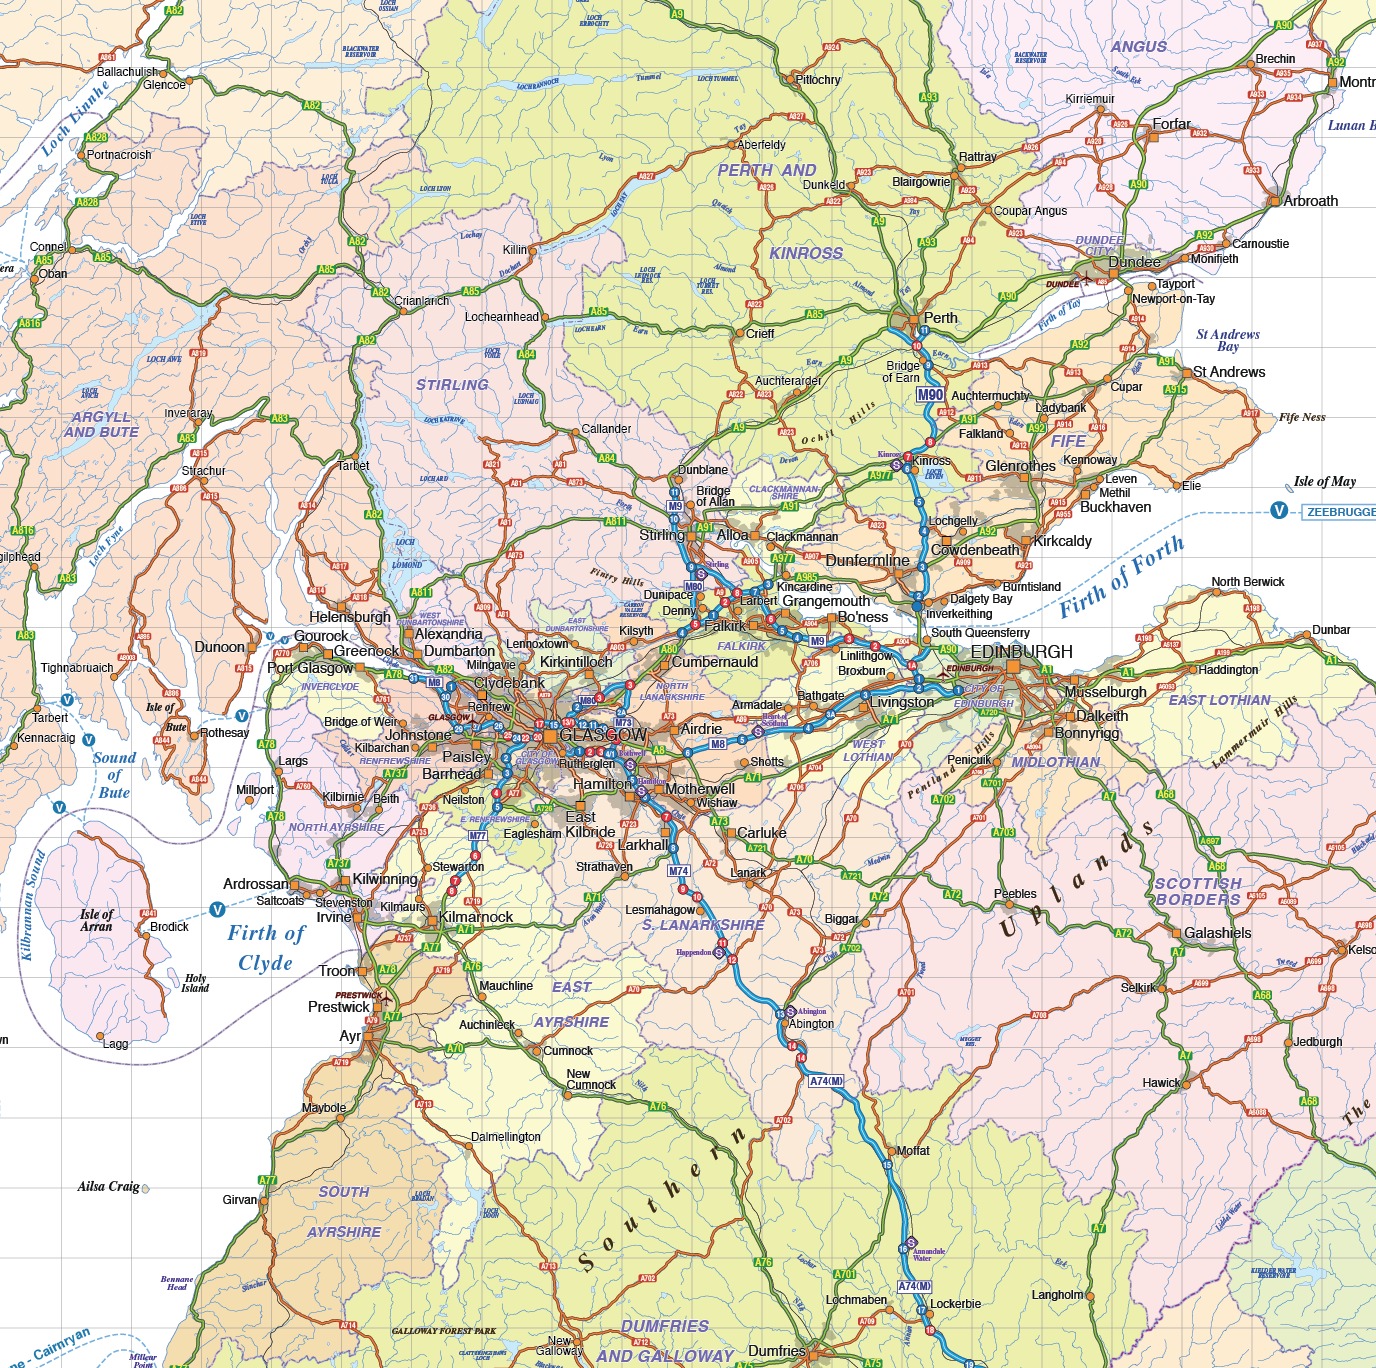 Scotland regions road and rail map @1m scale in illustrator and ...